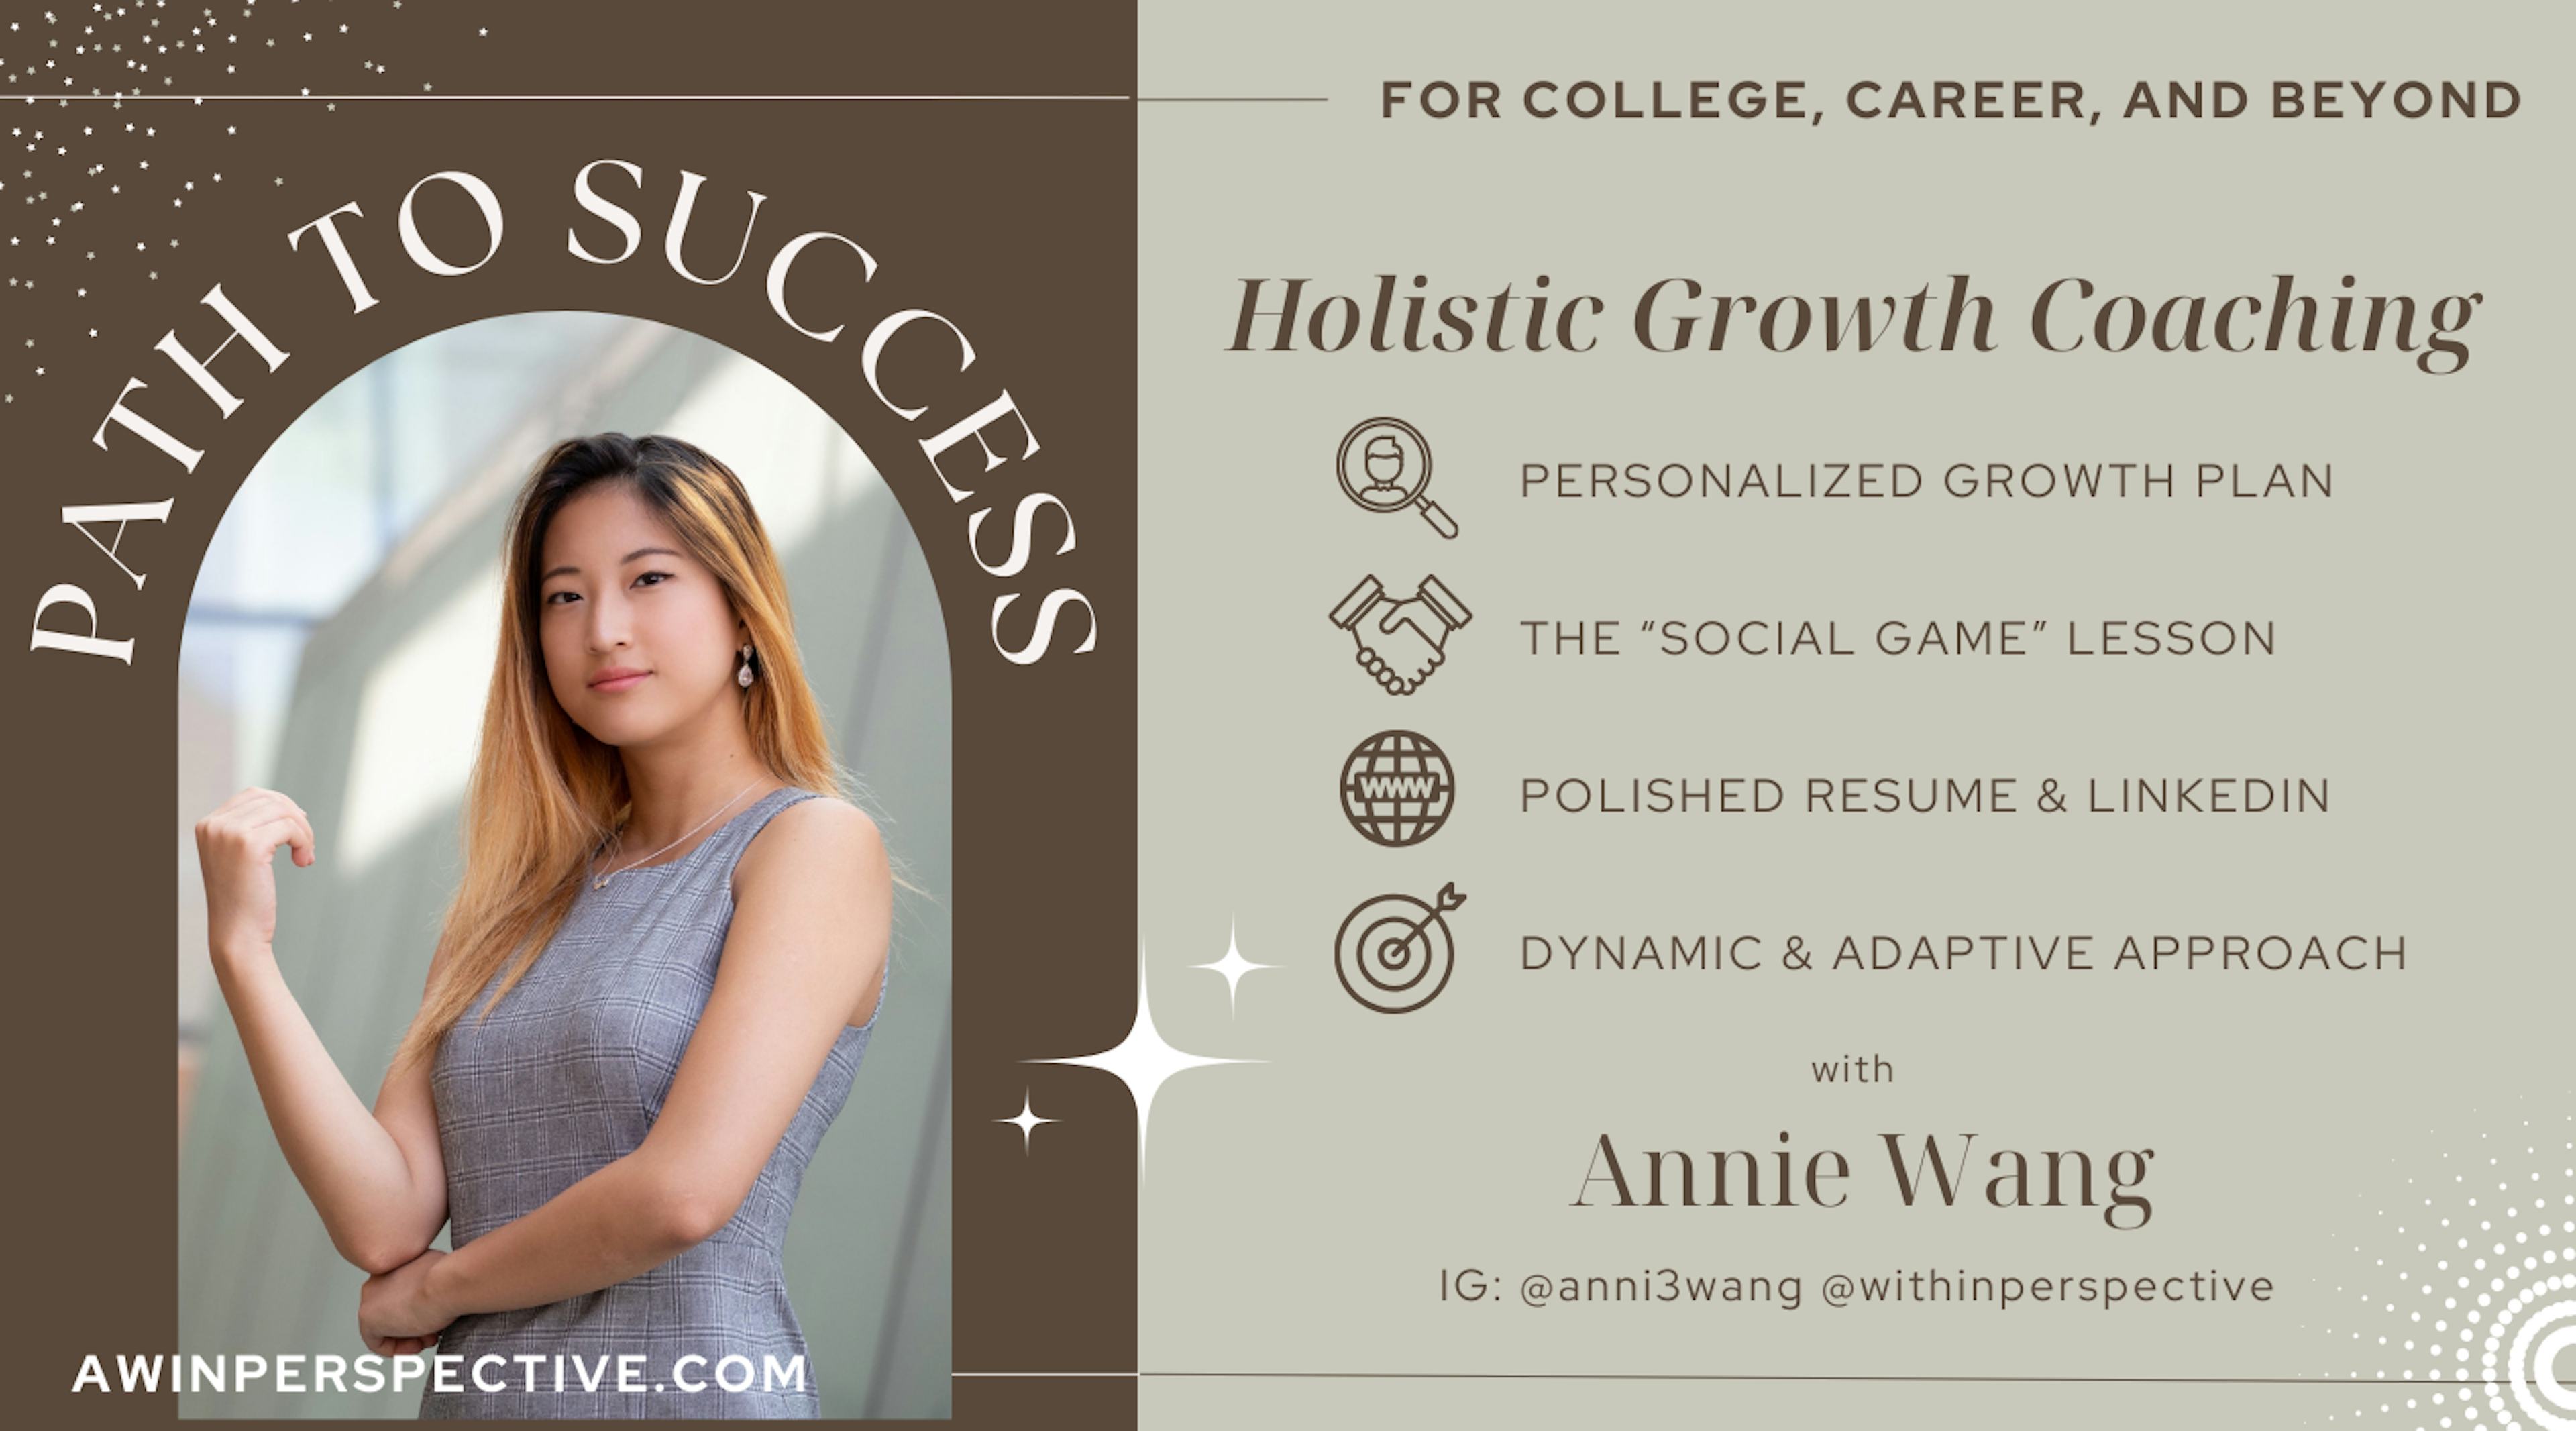 Path to Success - Navigate the "Social Game" for Life, Career, & Beyond